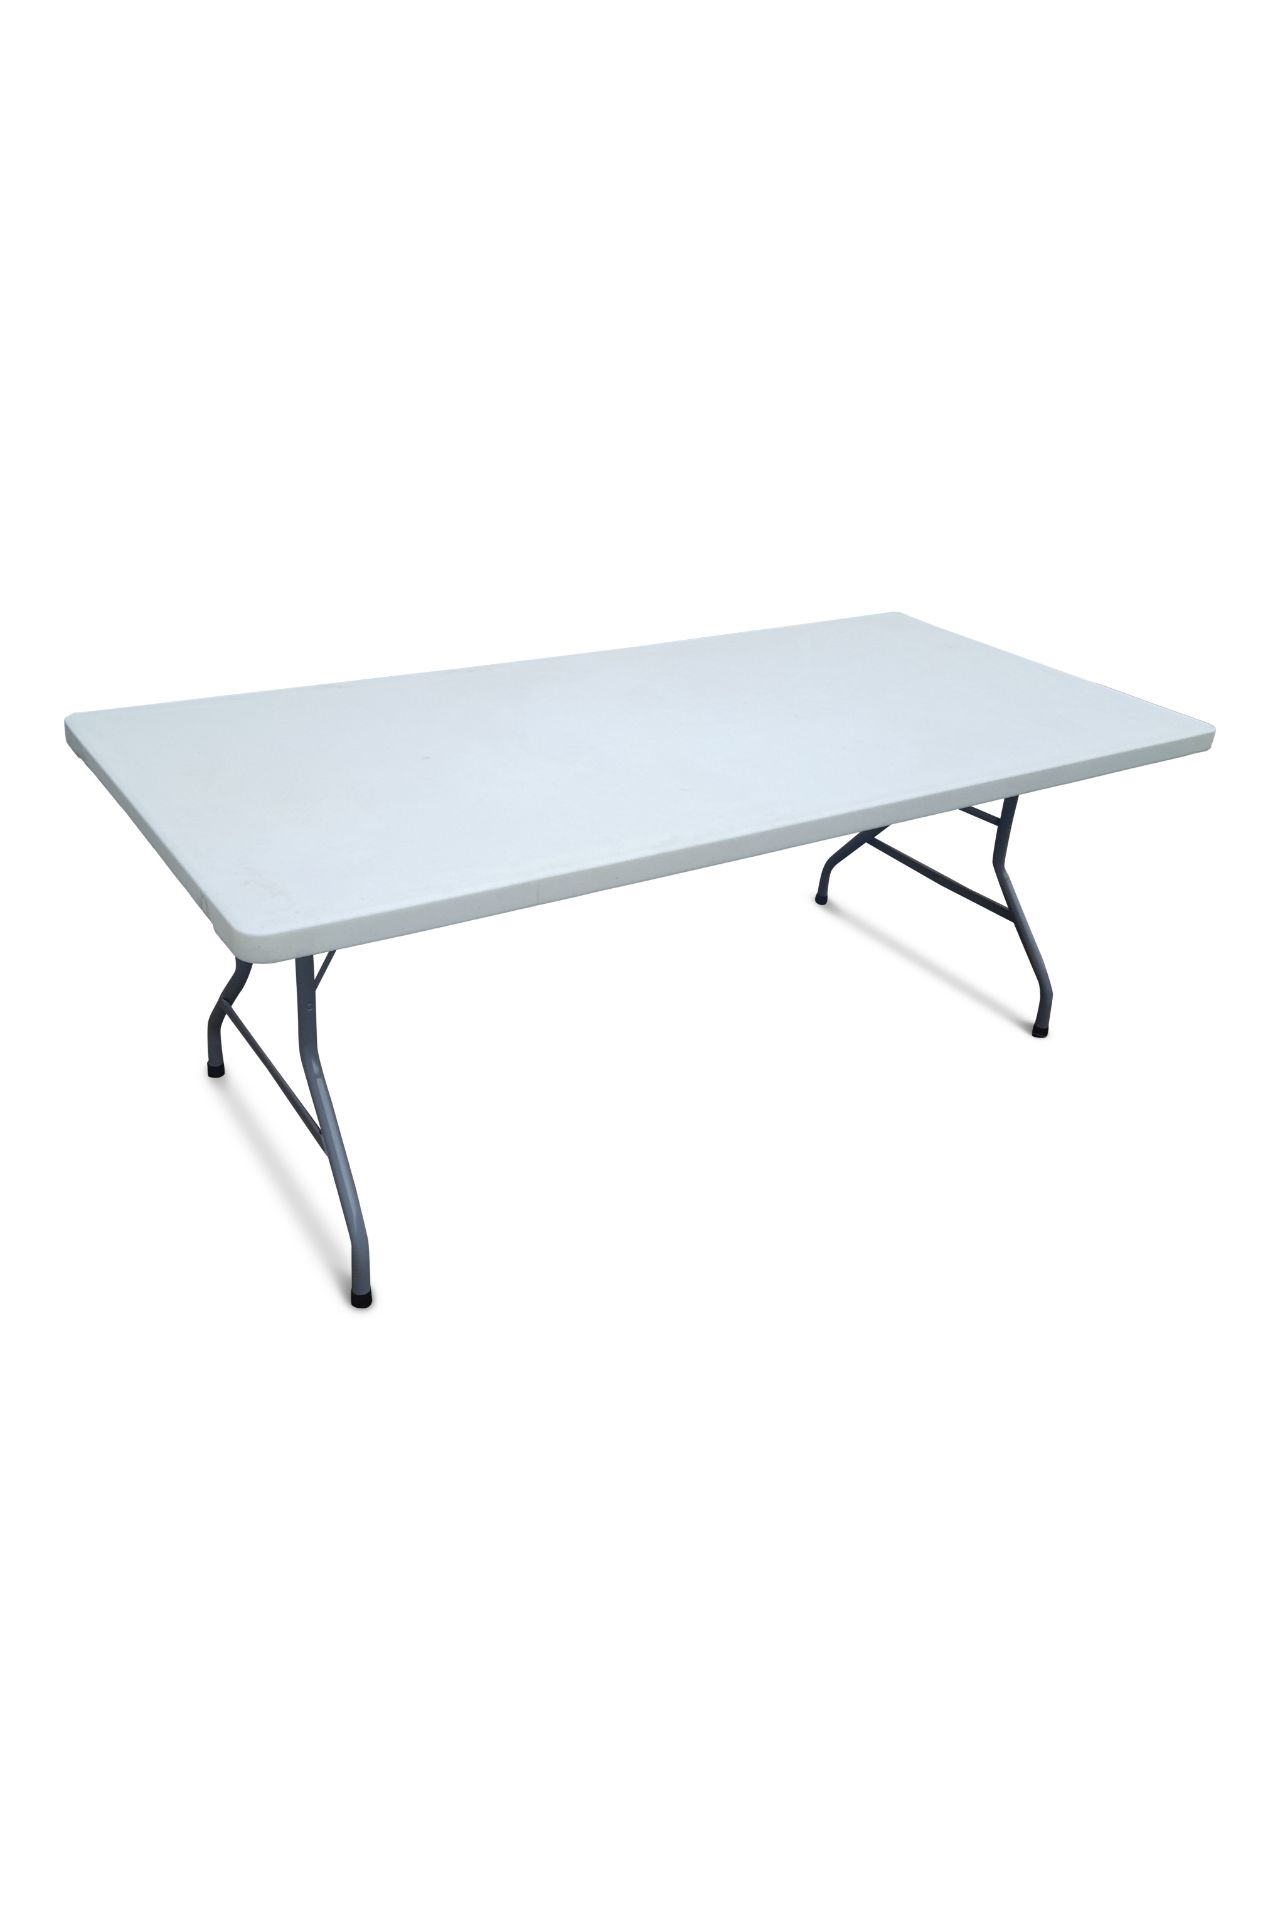 V *TRADE QTY* Grade A 6ft 6" Plastic Trestle Table X 30 YOUR BID PRICE TO BE MULTIPLIED BY THIRTY